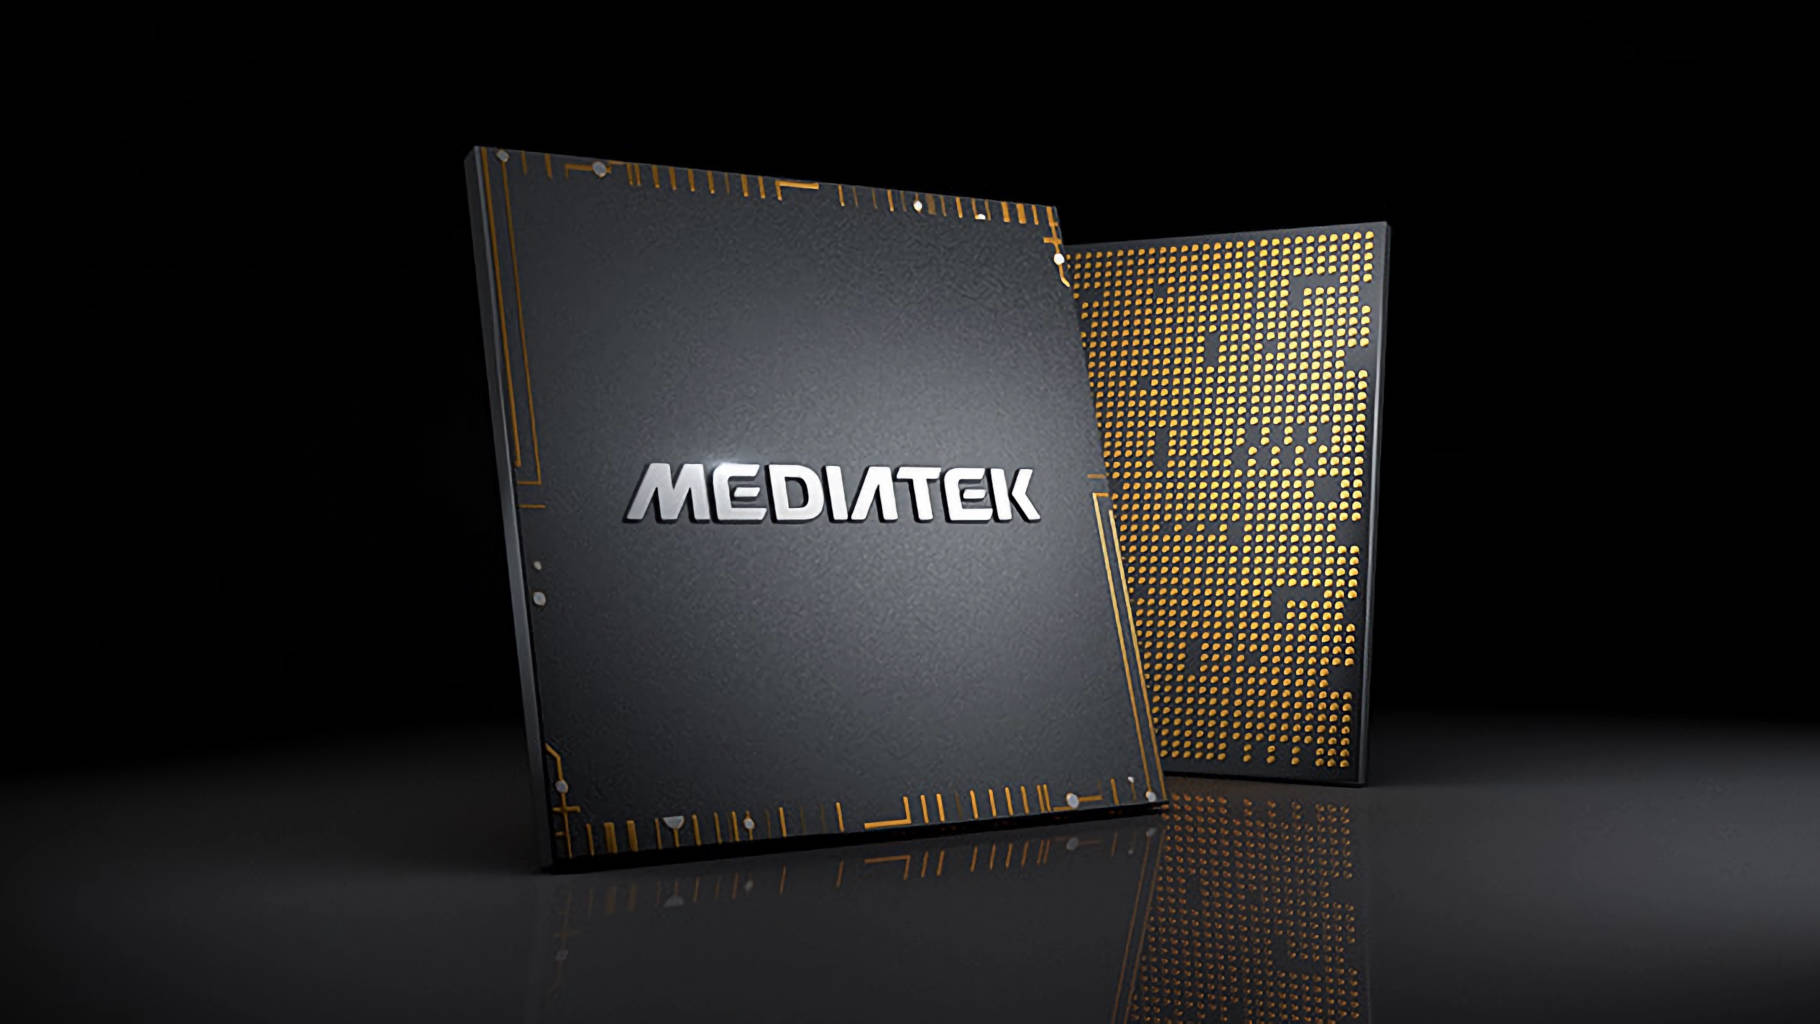  MediaTek is aiming to do a Qualcomm and make Arm chips for Copilot+ PCs, targeting a 2025 release 